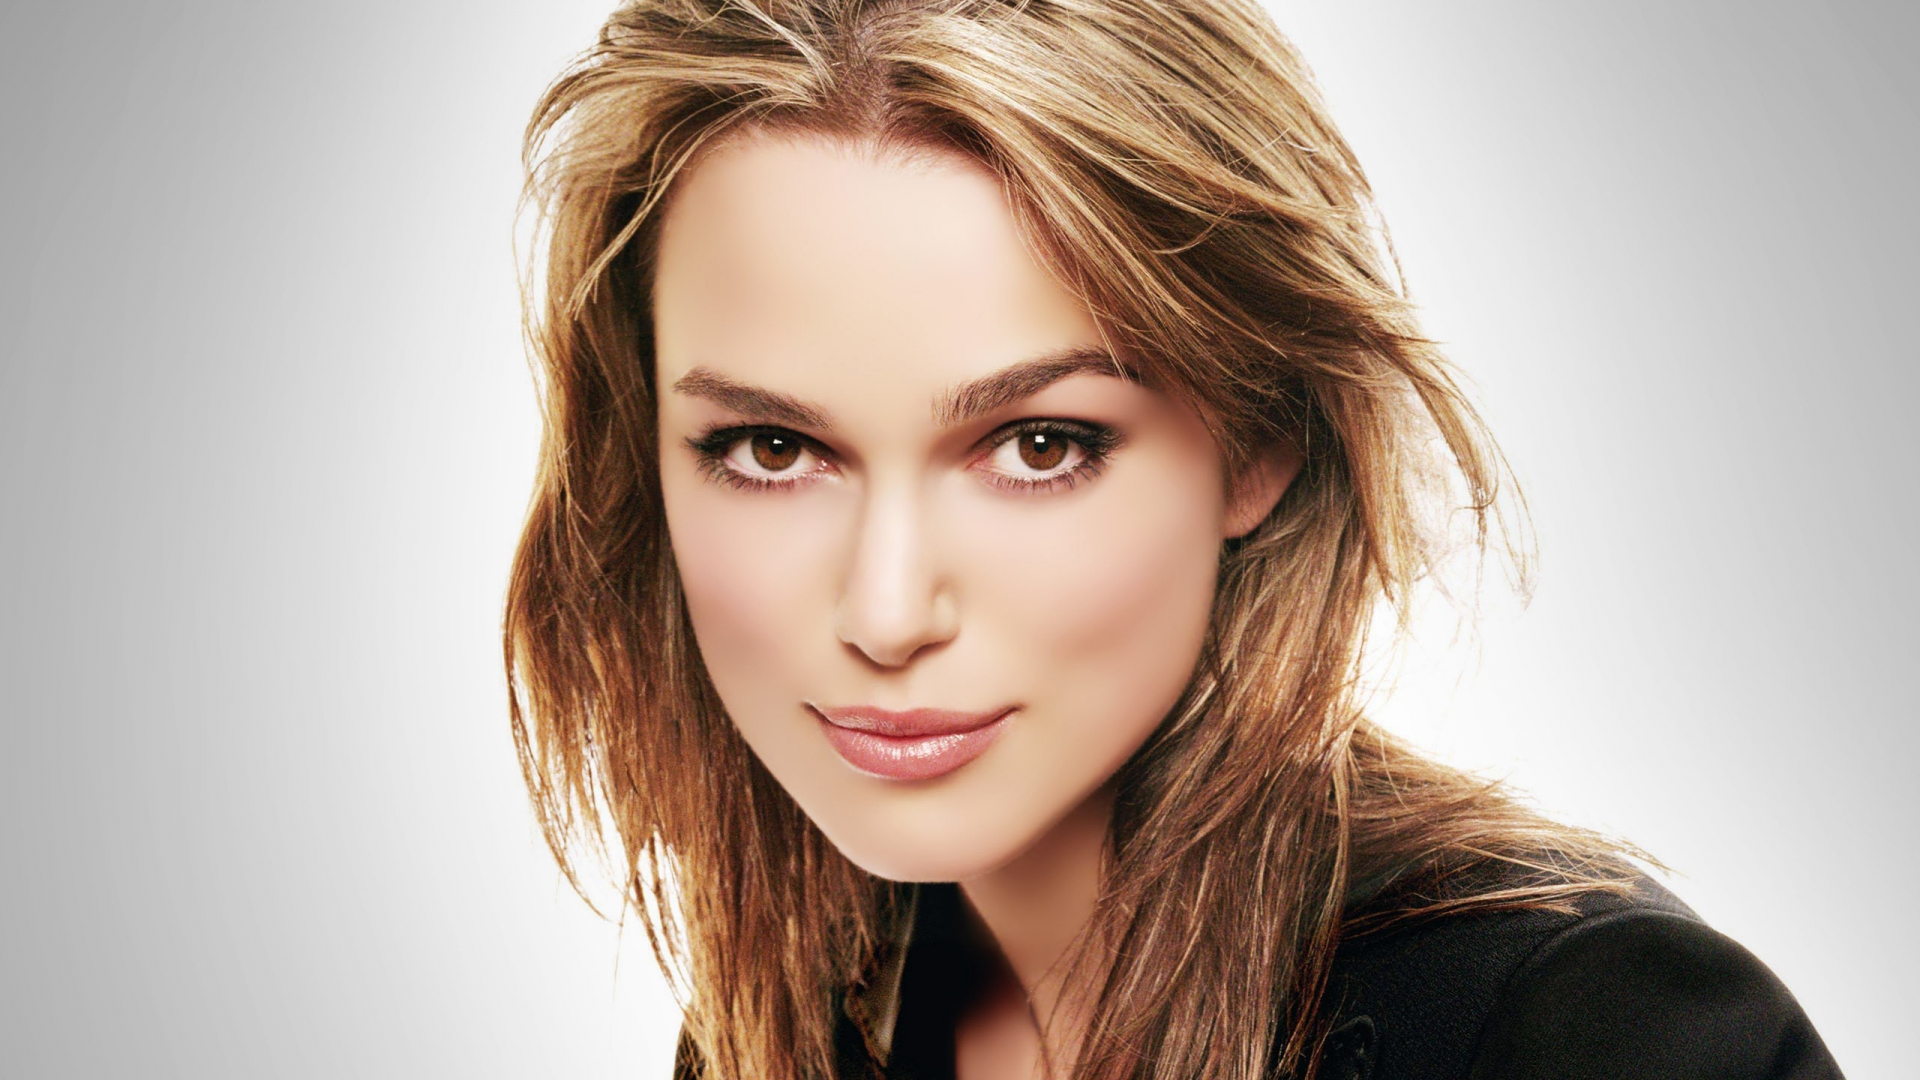 Beautiful Keira Knightley for 1920 x 1080 HDTV 1080p resolution